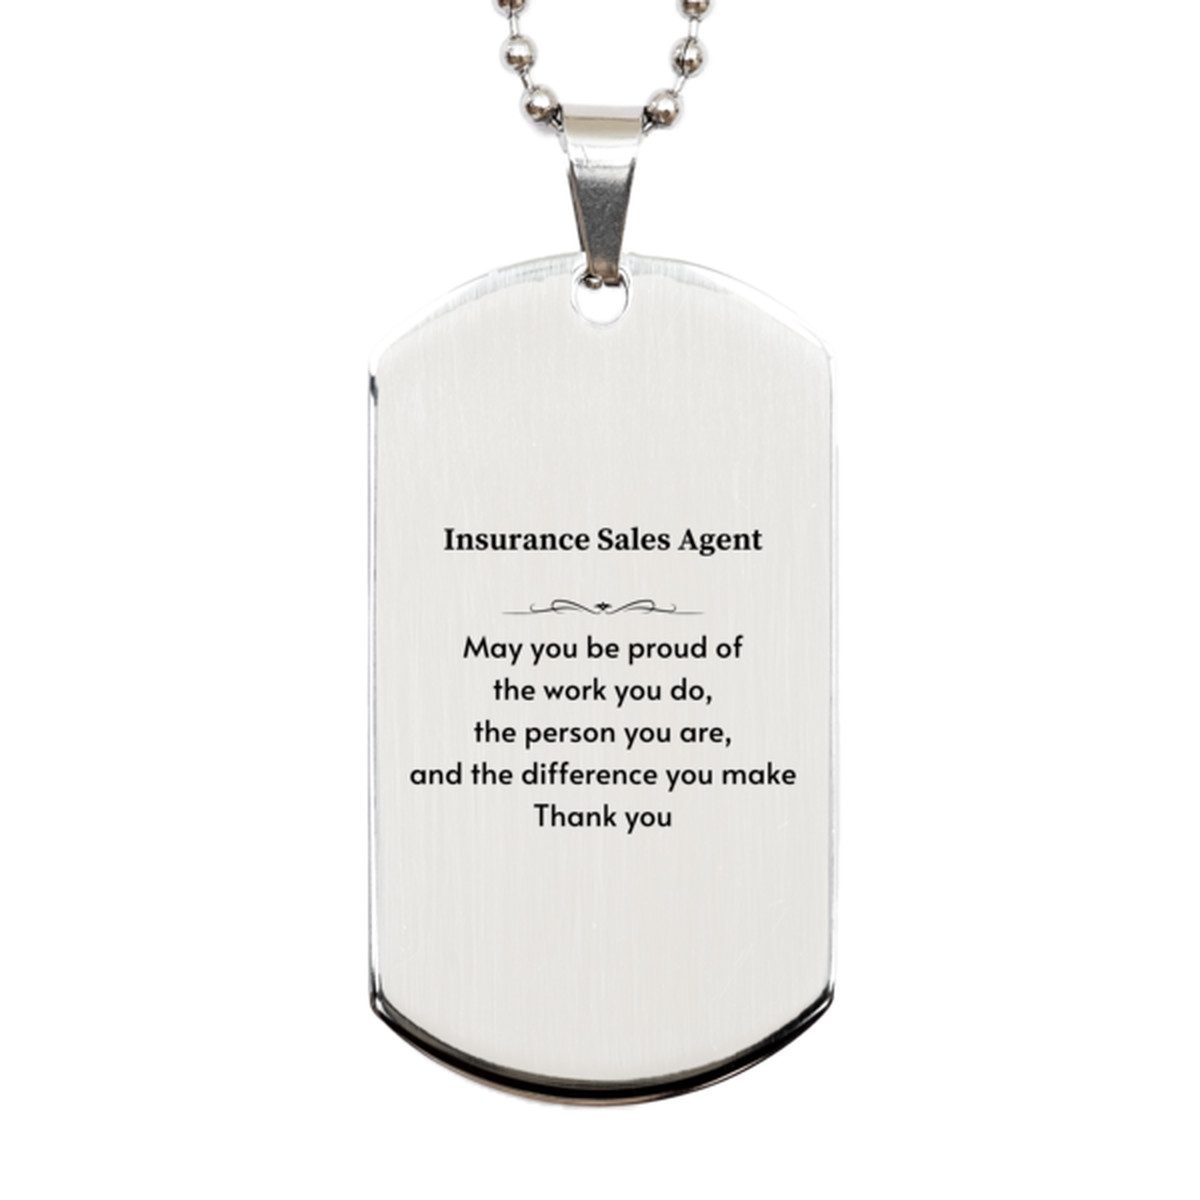 Heartwarming Silver Dog Tag Retirement Coworkers Gifts for Insurance Sales Agent, Insurance Sales Agent May You be proud of the work you do, the person you are Gifts for Boss Men Women Friends